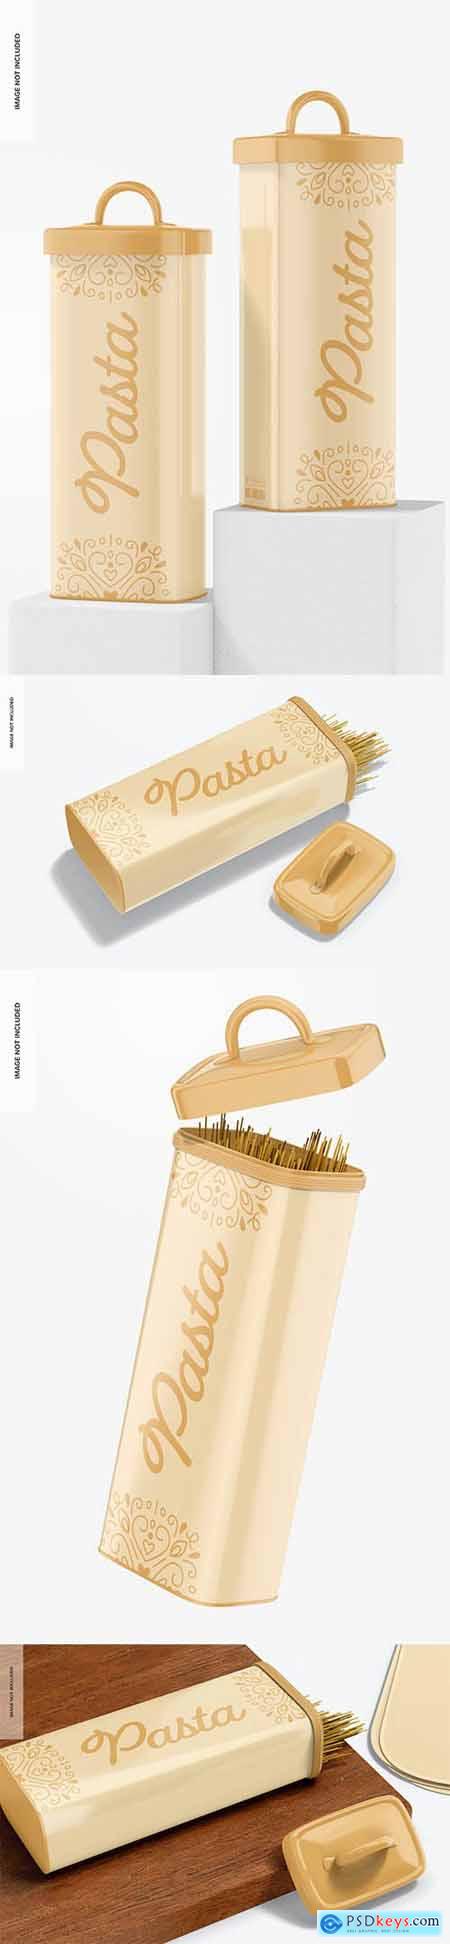 Tall pasta storage container mockup